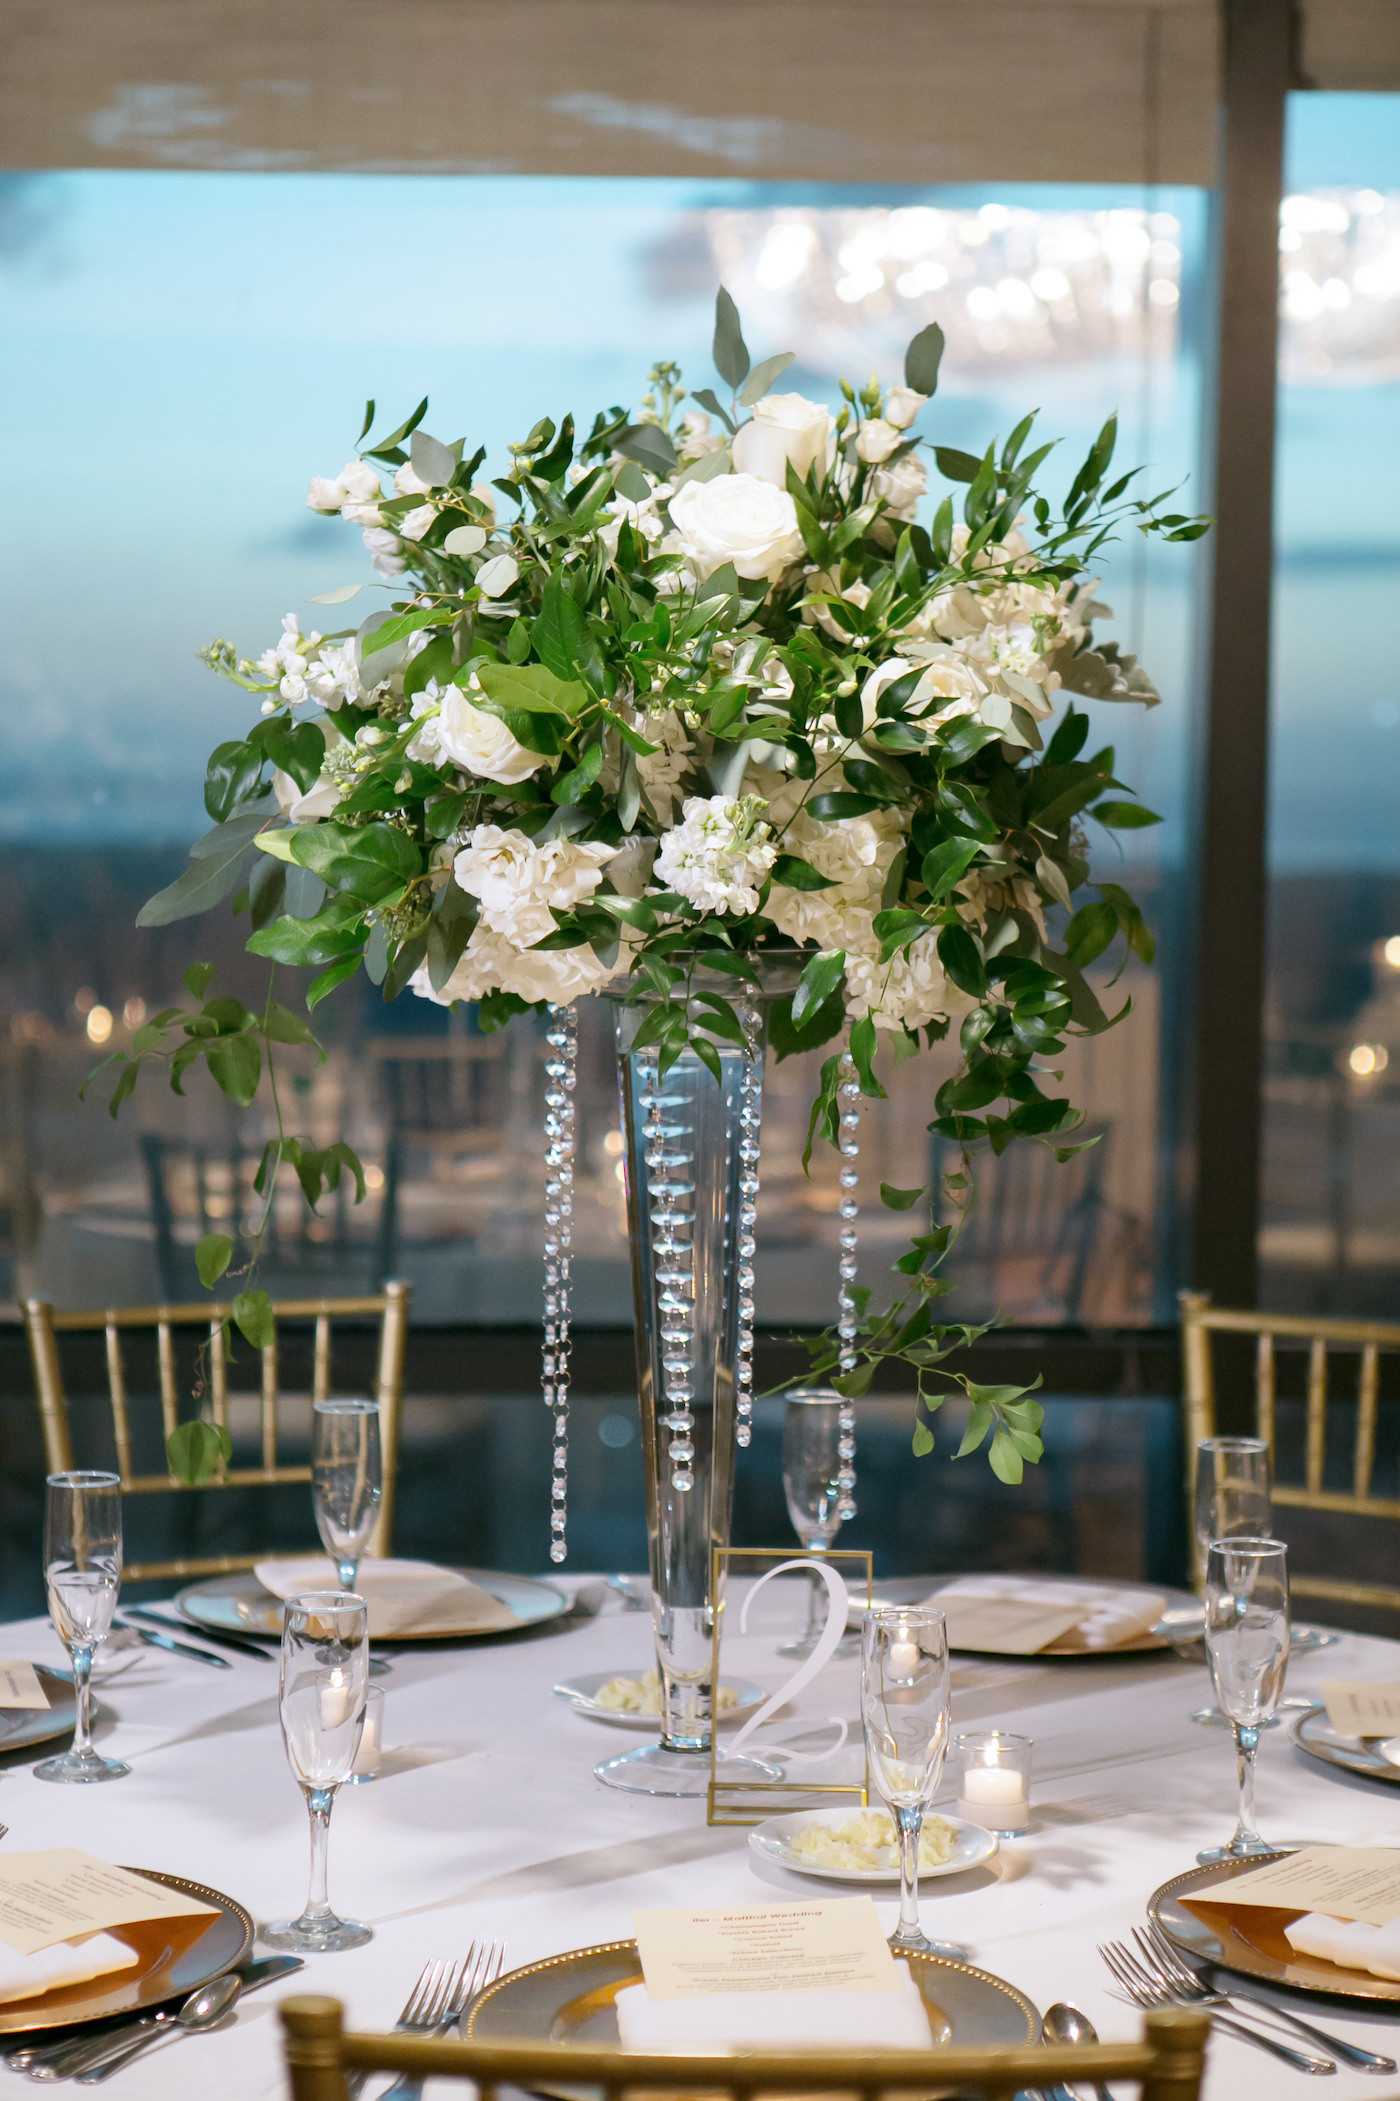 Classic Timeless Wedding Reception Decor, Tall Greenery Leaves and White Roses, Hydrangeas Floral Centerpiece with Hanging Crystals | Wedding Photographer Carrie Wildes Photography